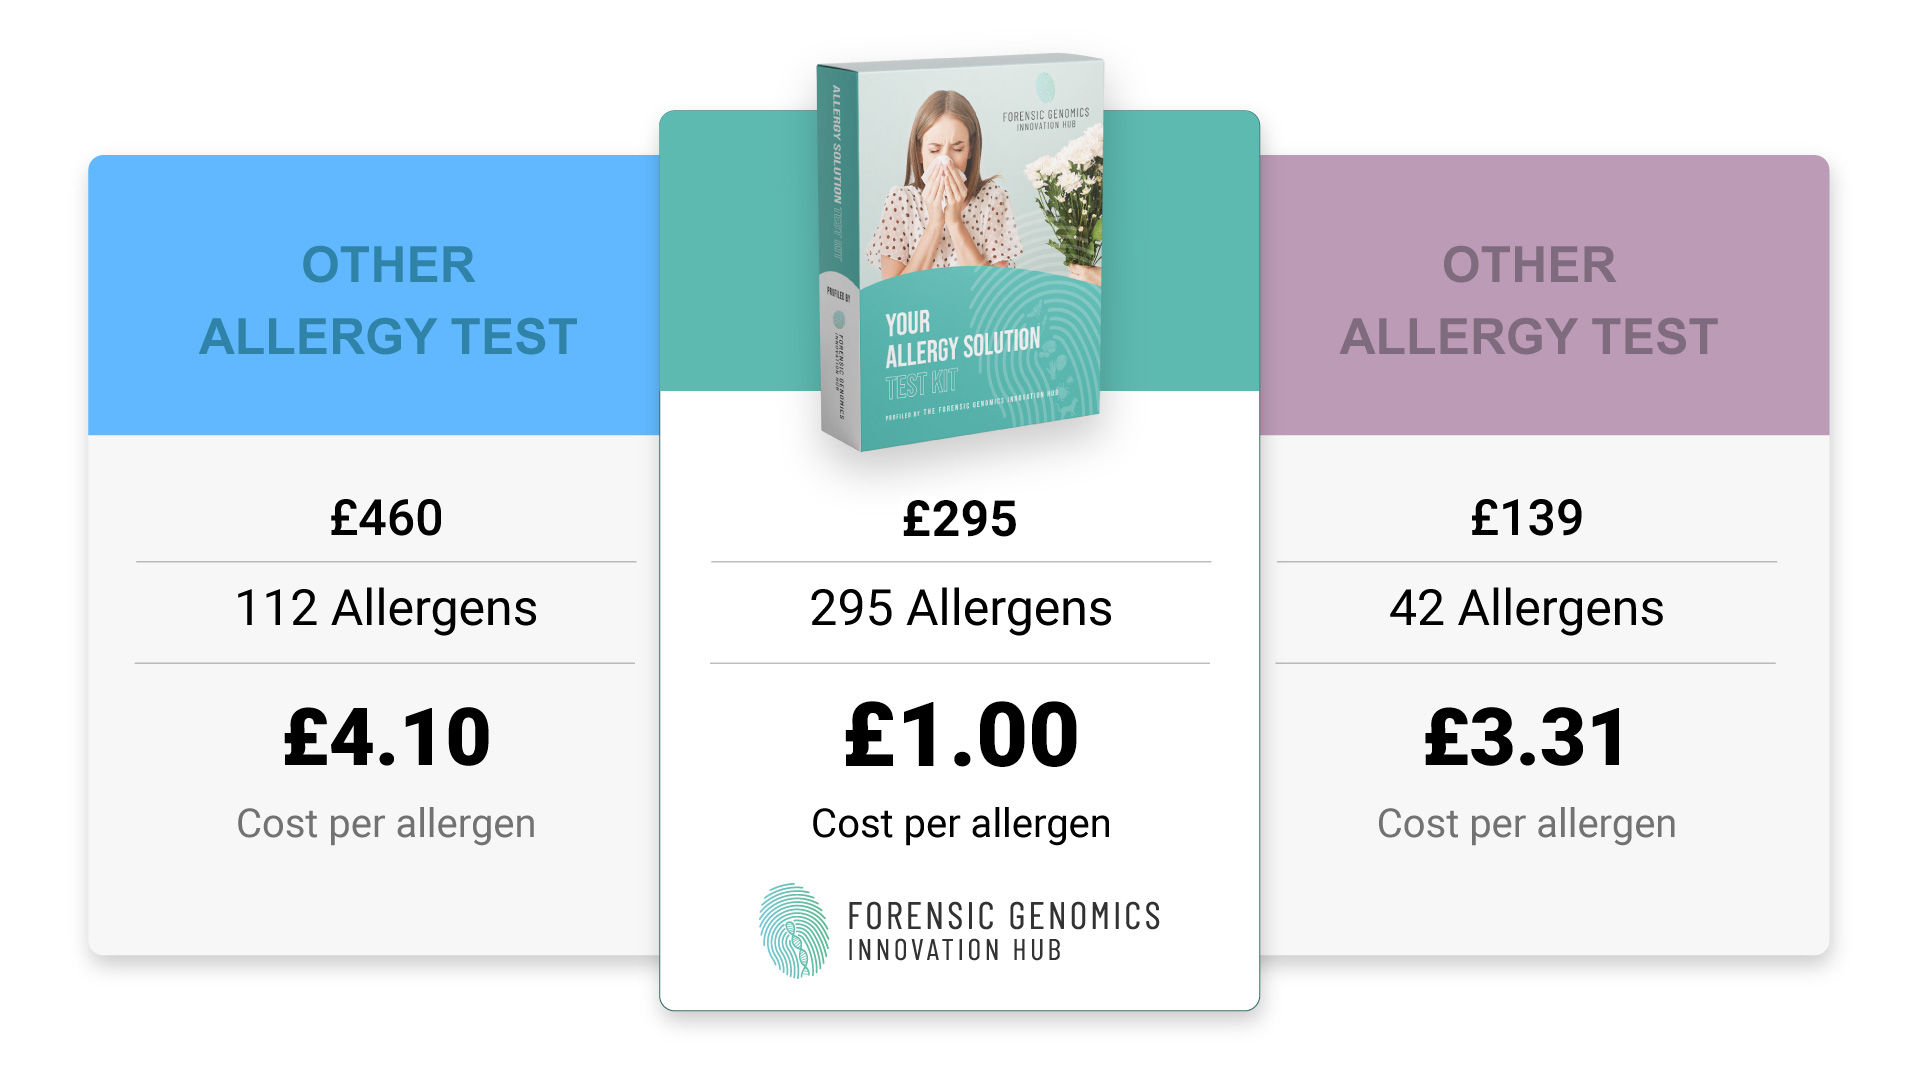 allergy-test-price-comparison-table-updated